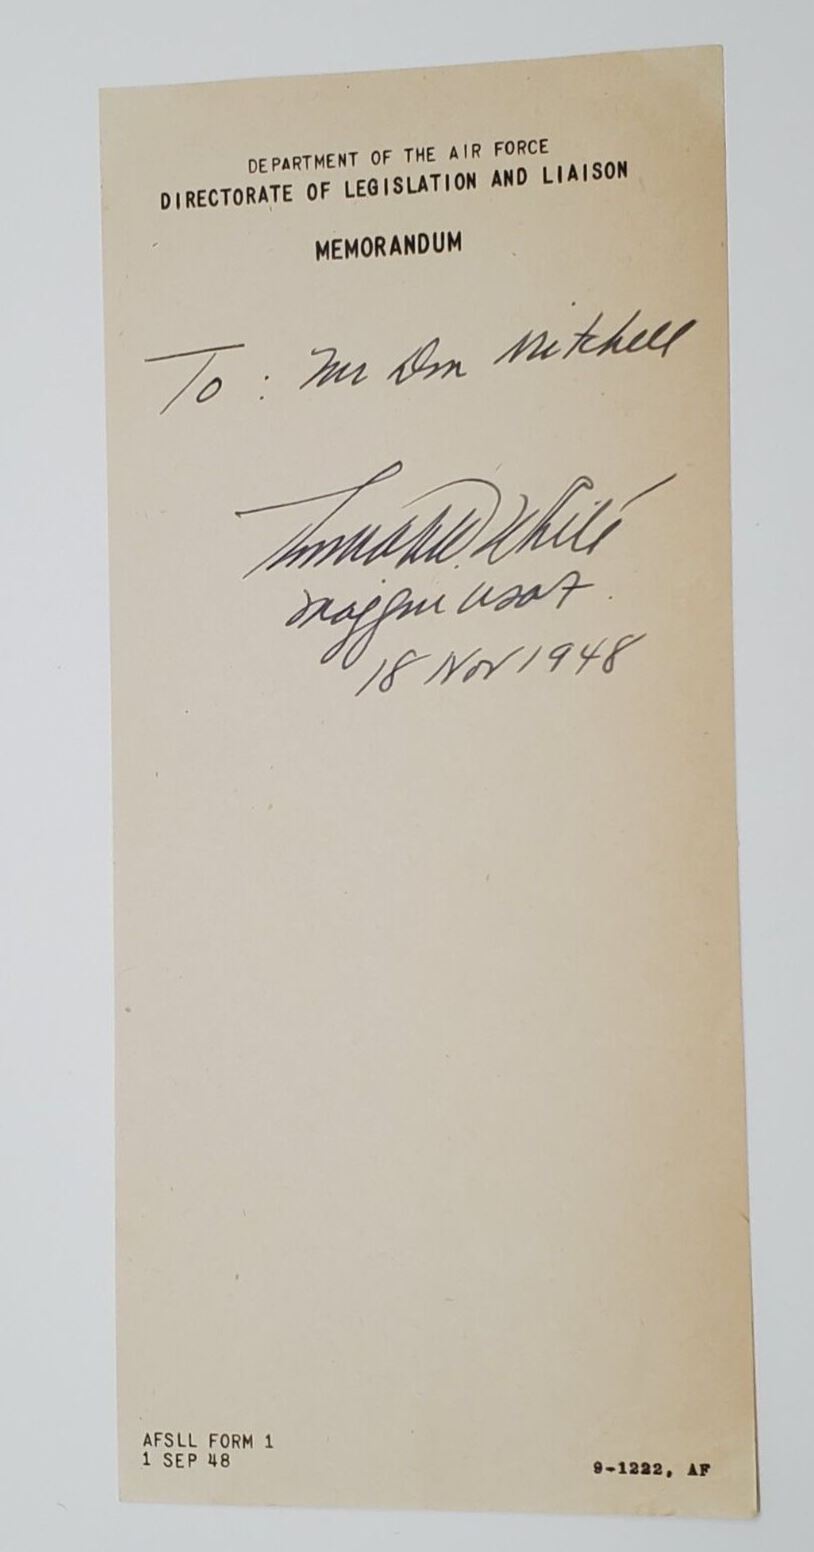 1948 Military Autograph General Thomas D. White Department of the Air Force